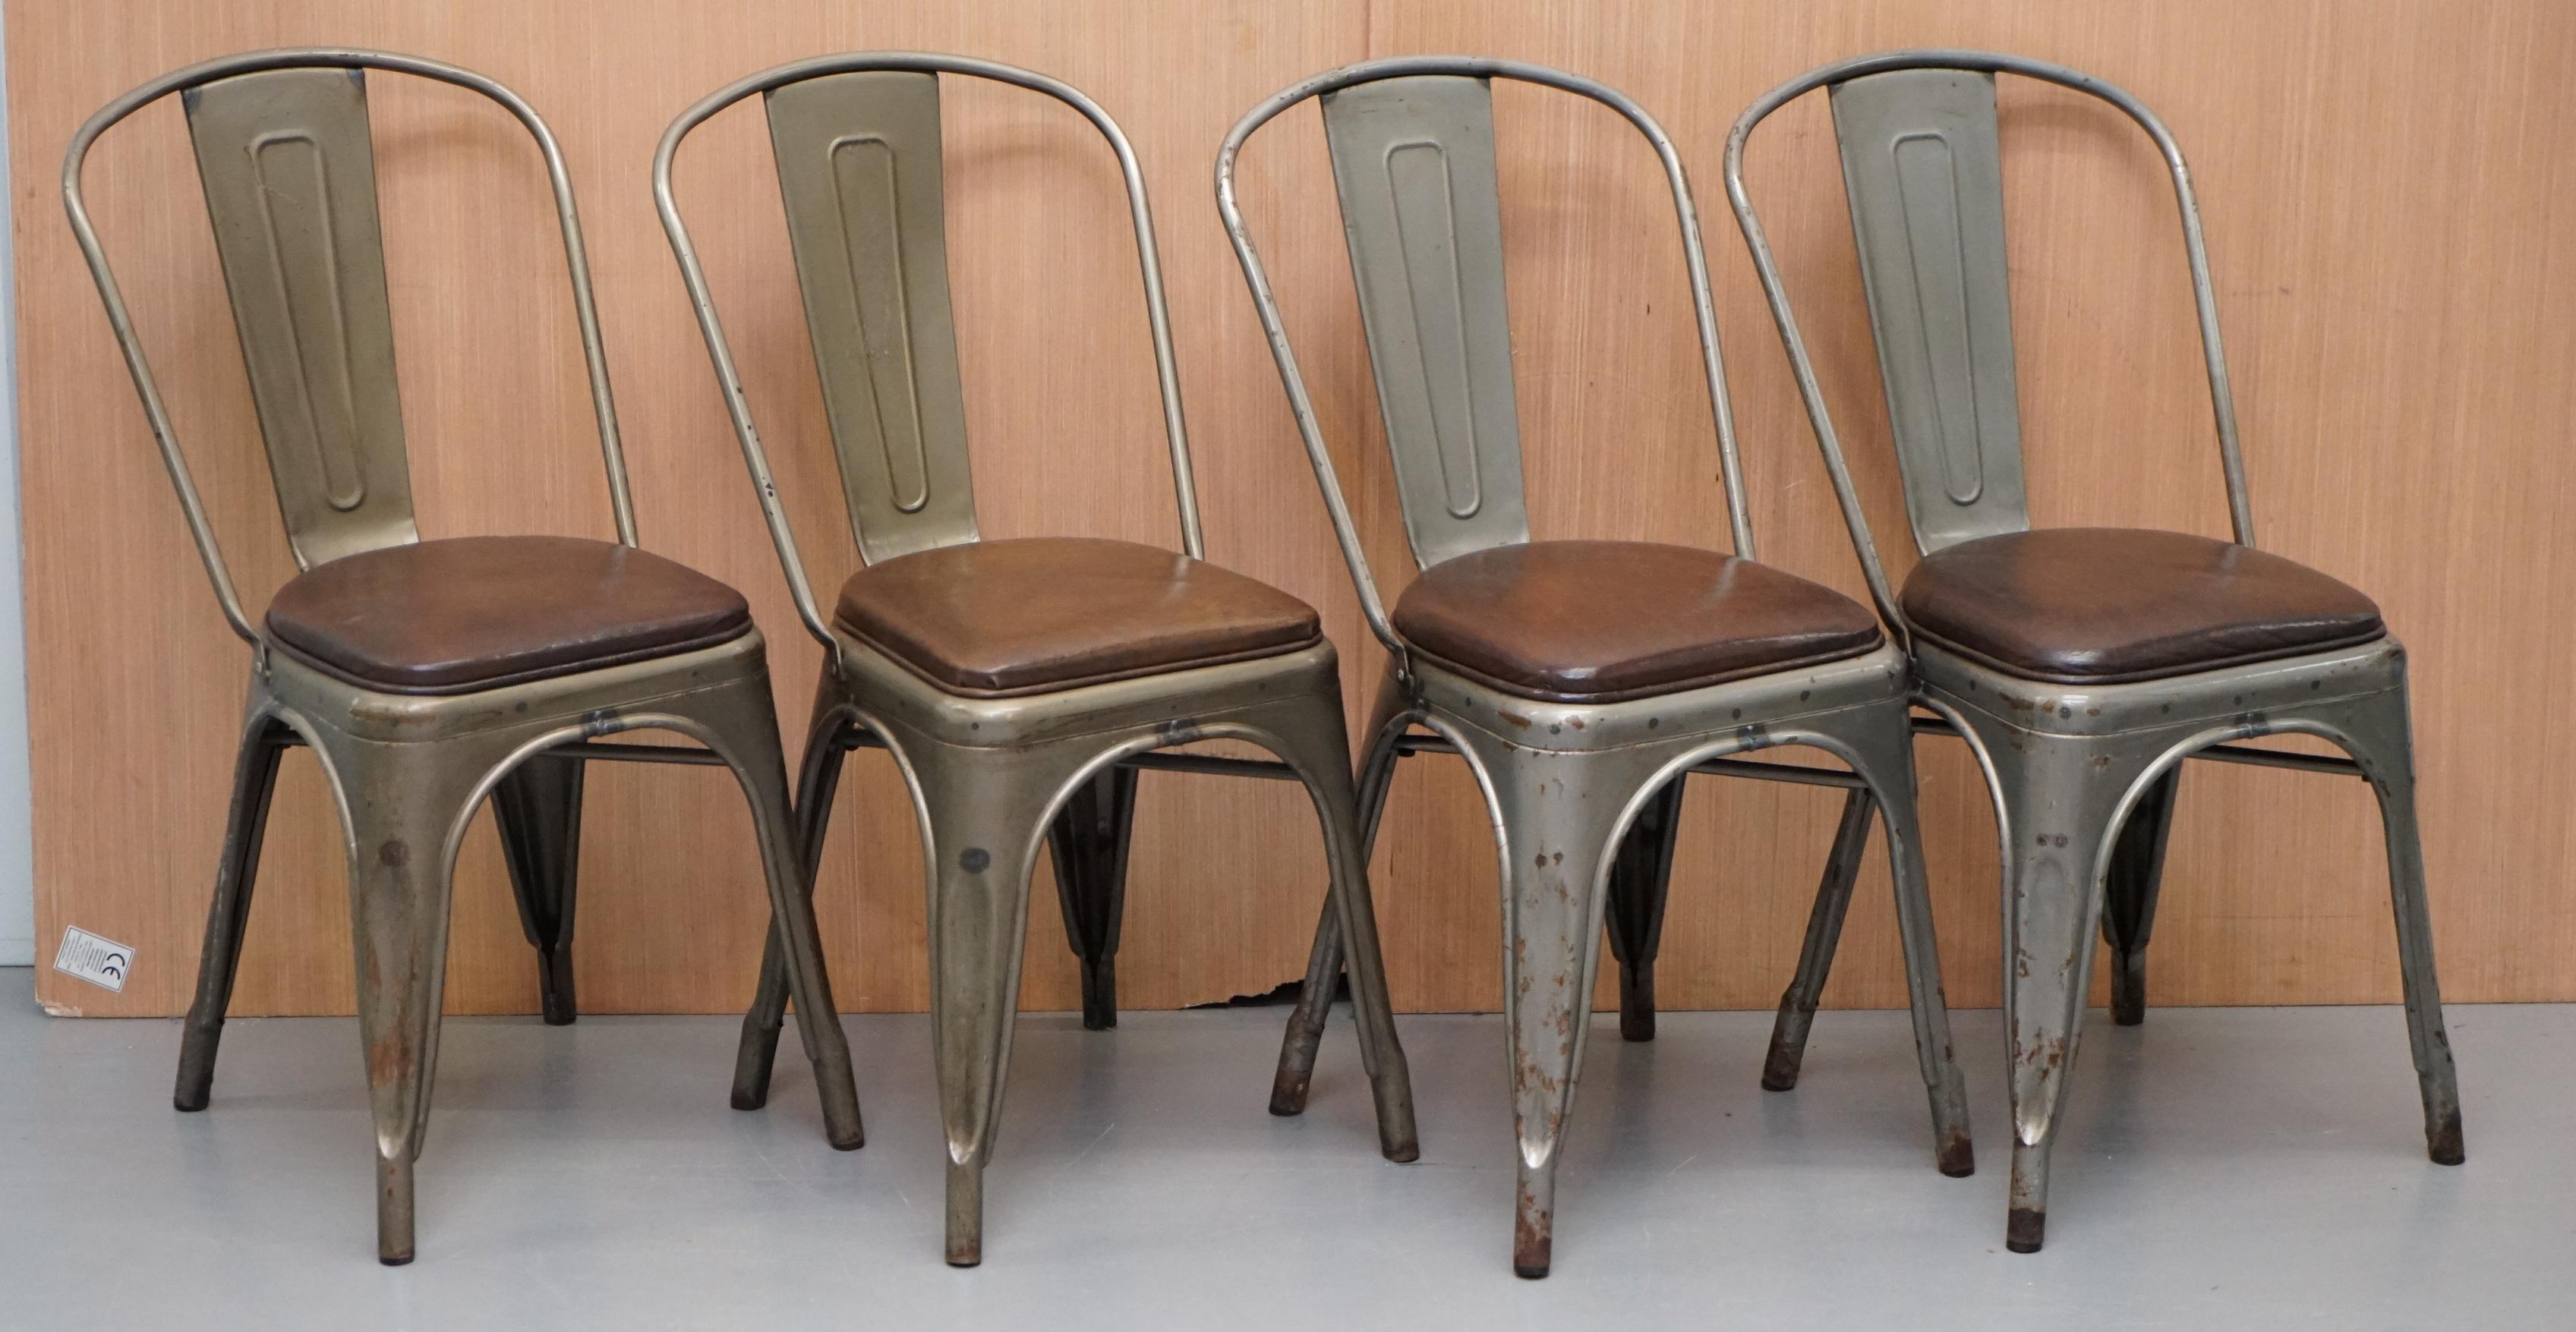 We are delighted to offer for sale this stunning set of vintage Tolix V2 stacking chairs in Gun metal grey

A nice vintage distressed set, they are light weight, they stack well, they have lots of imperfections and charm

These chairs aren’t